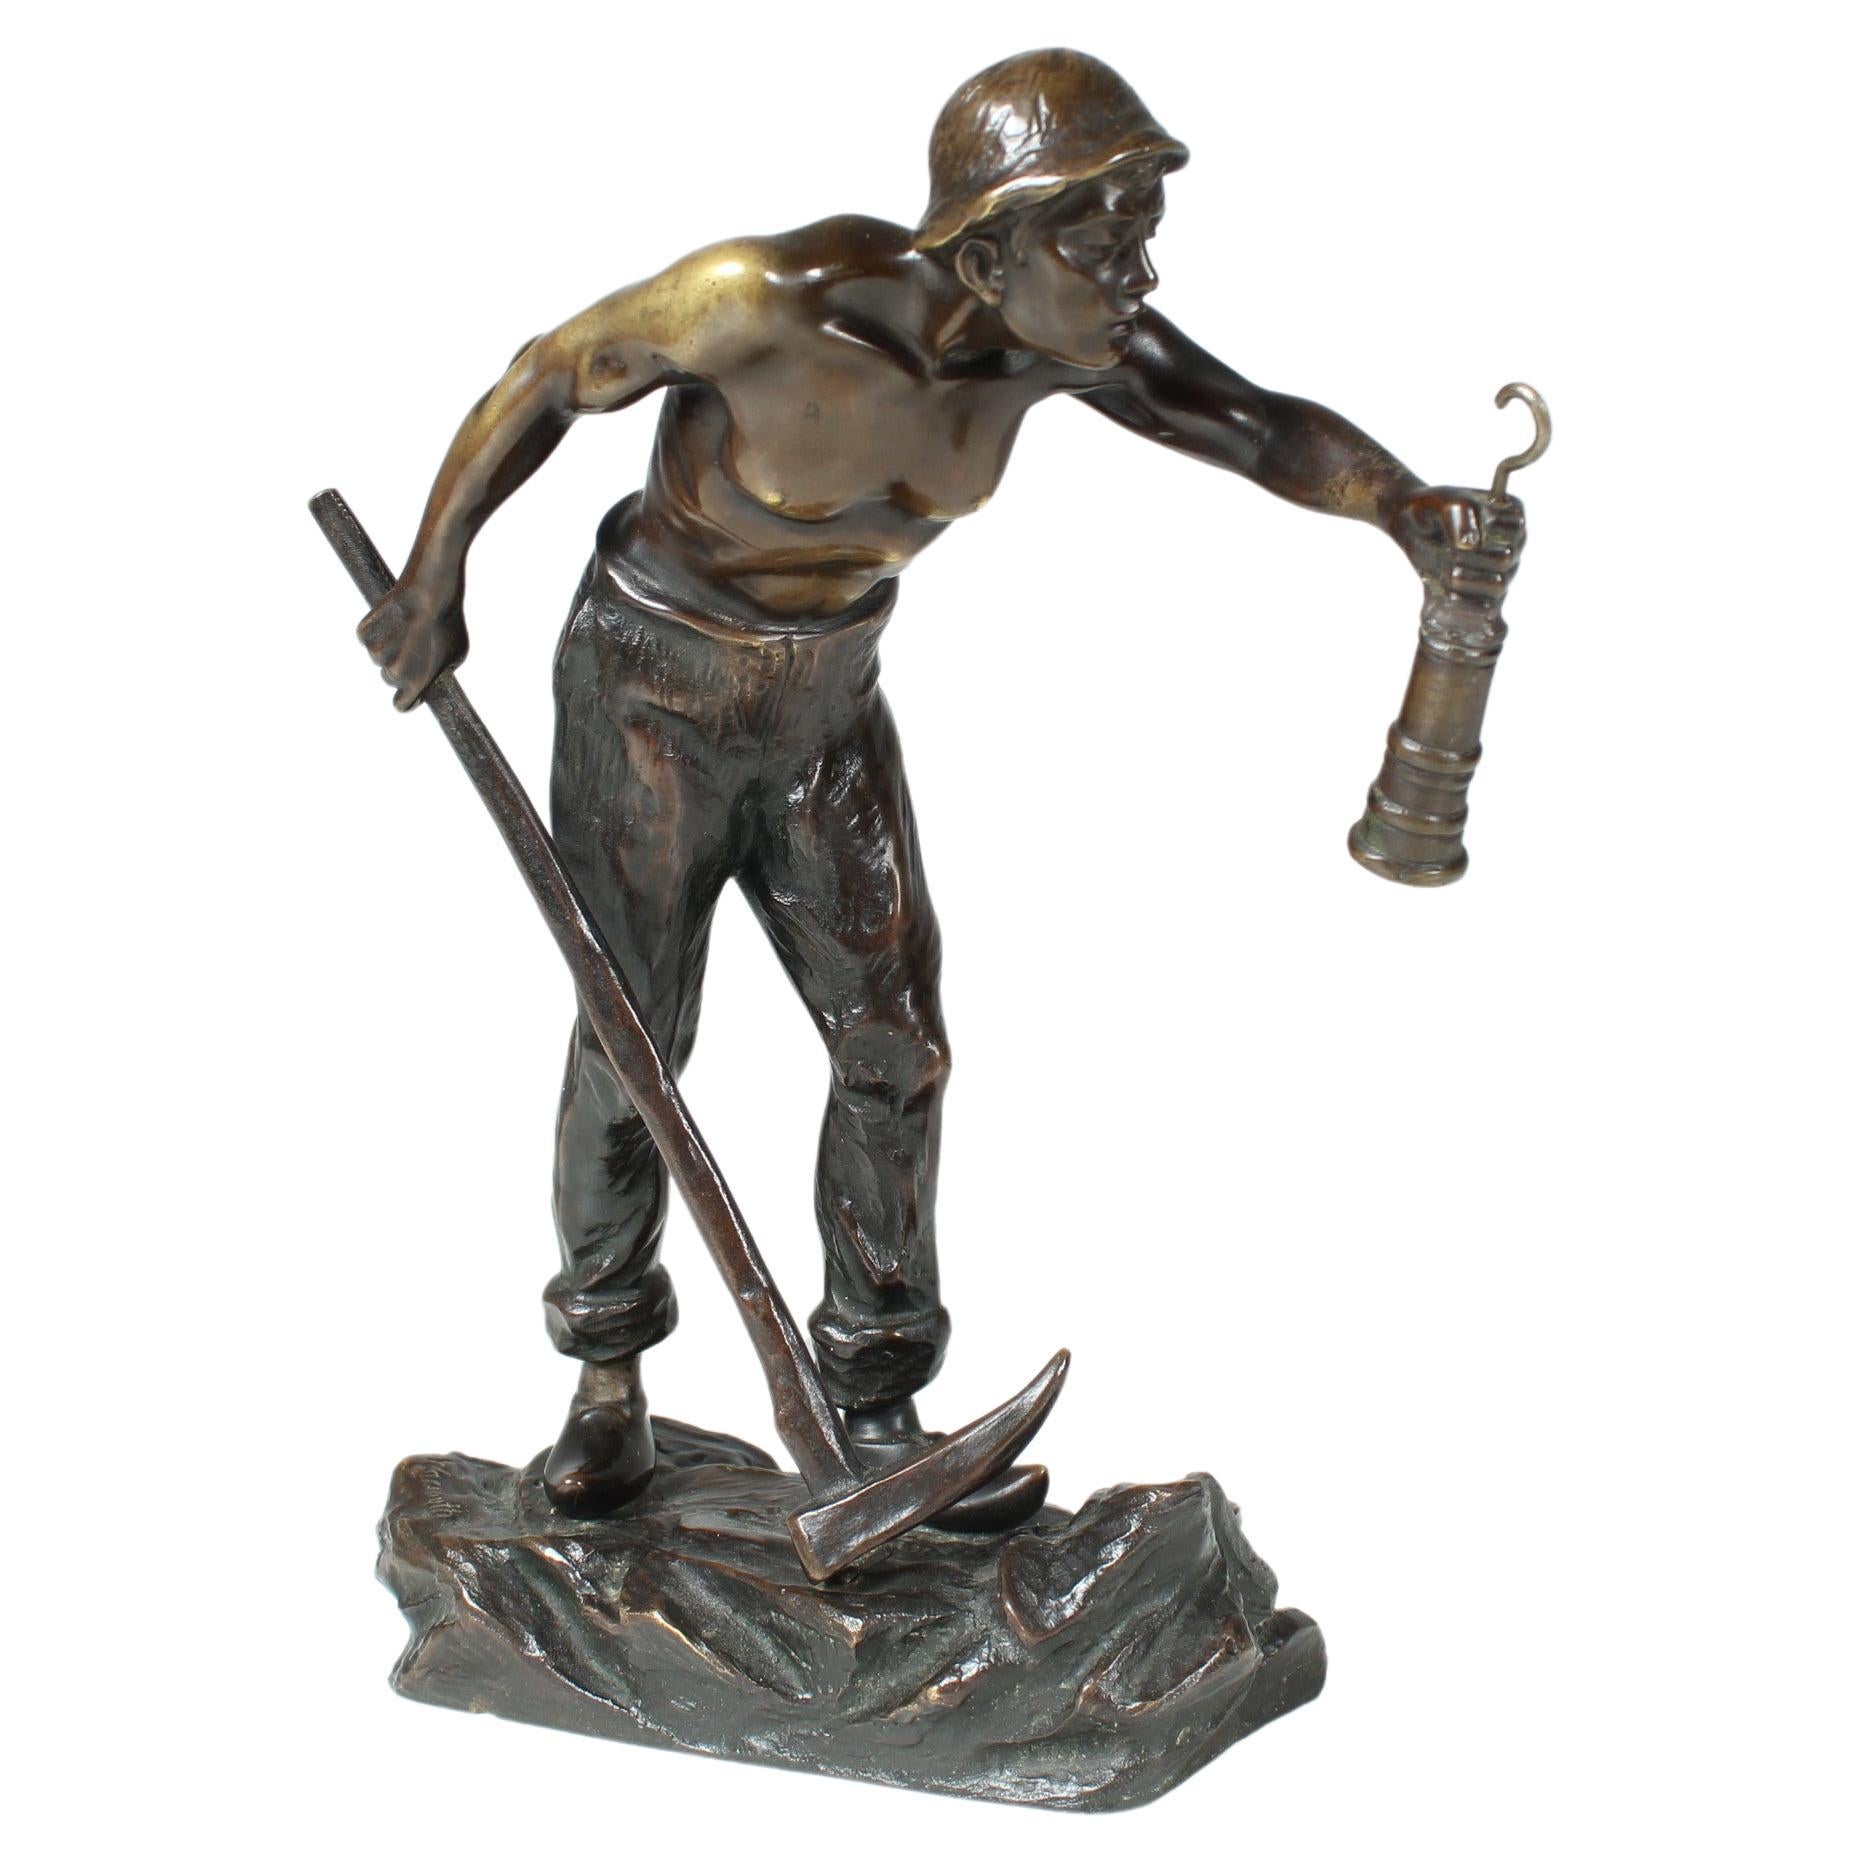 Bronze Sculpture, Signed By The Artist "W. Warmuth", Weather Examiner, Miner For Sale